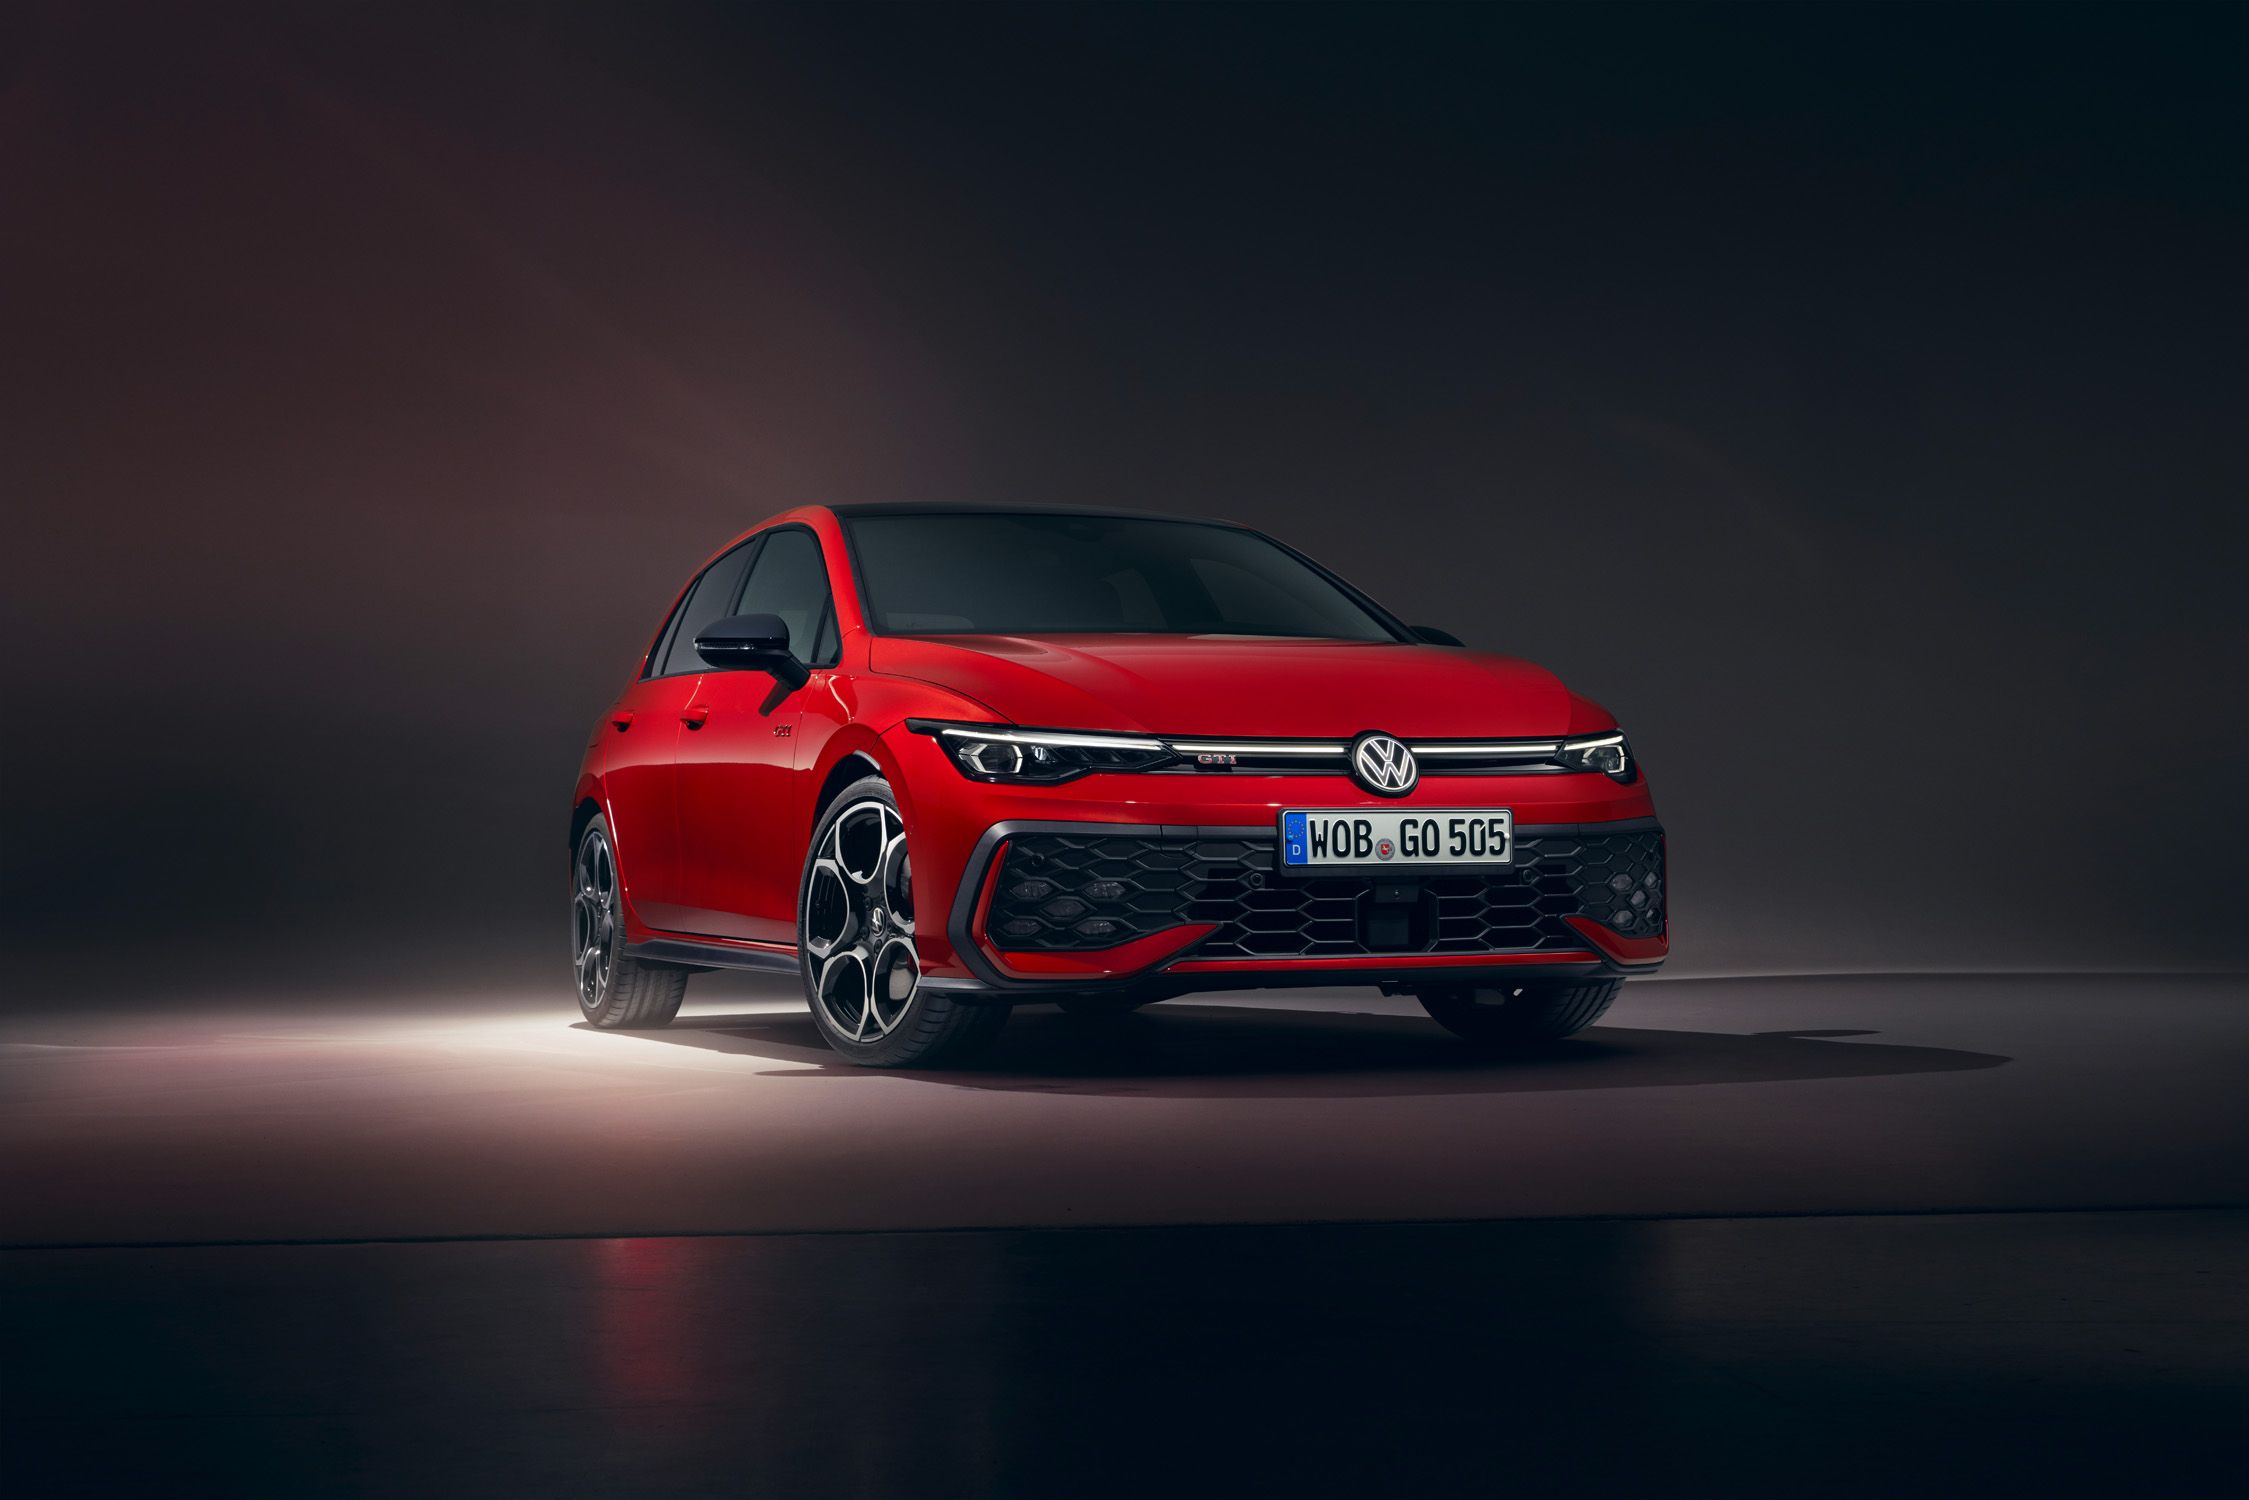 2021 Volkswagen Golf Mark 8 – What We Know about the New Compact Hatchback